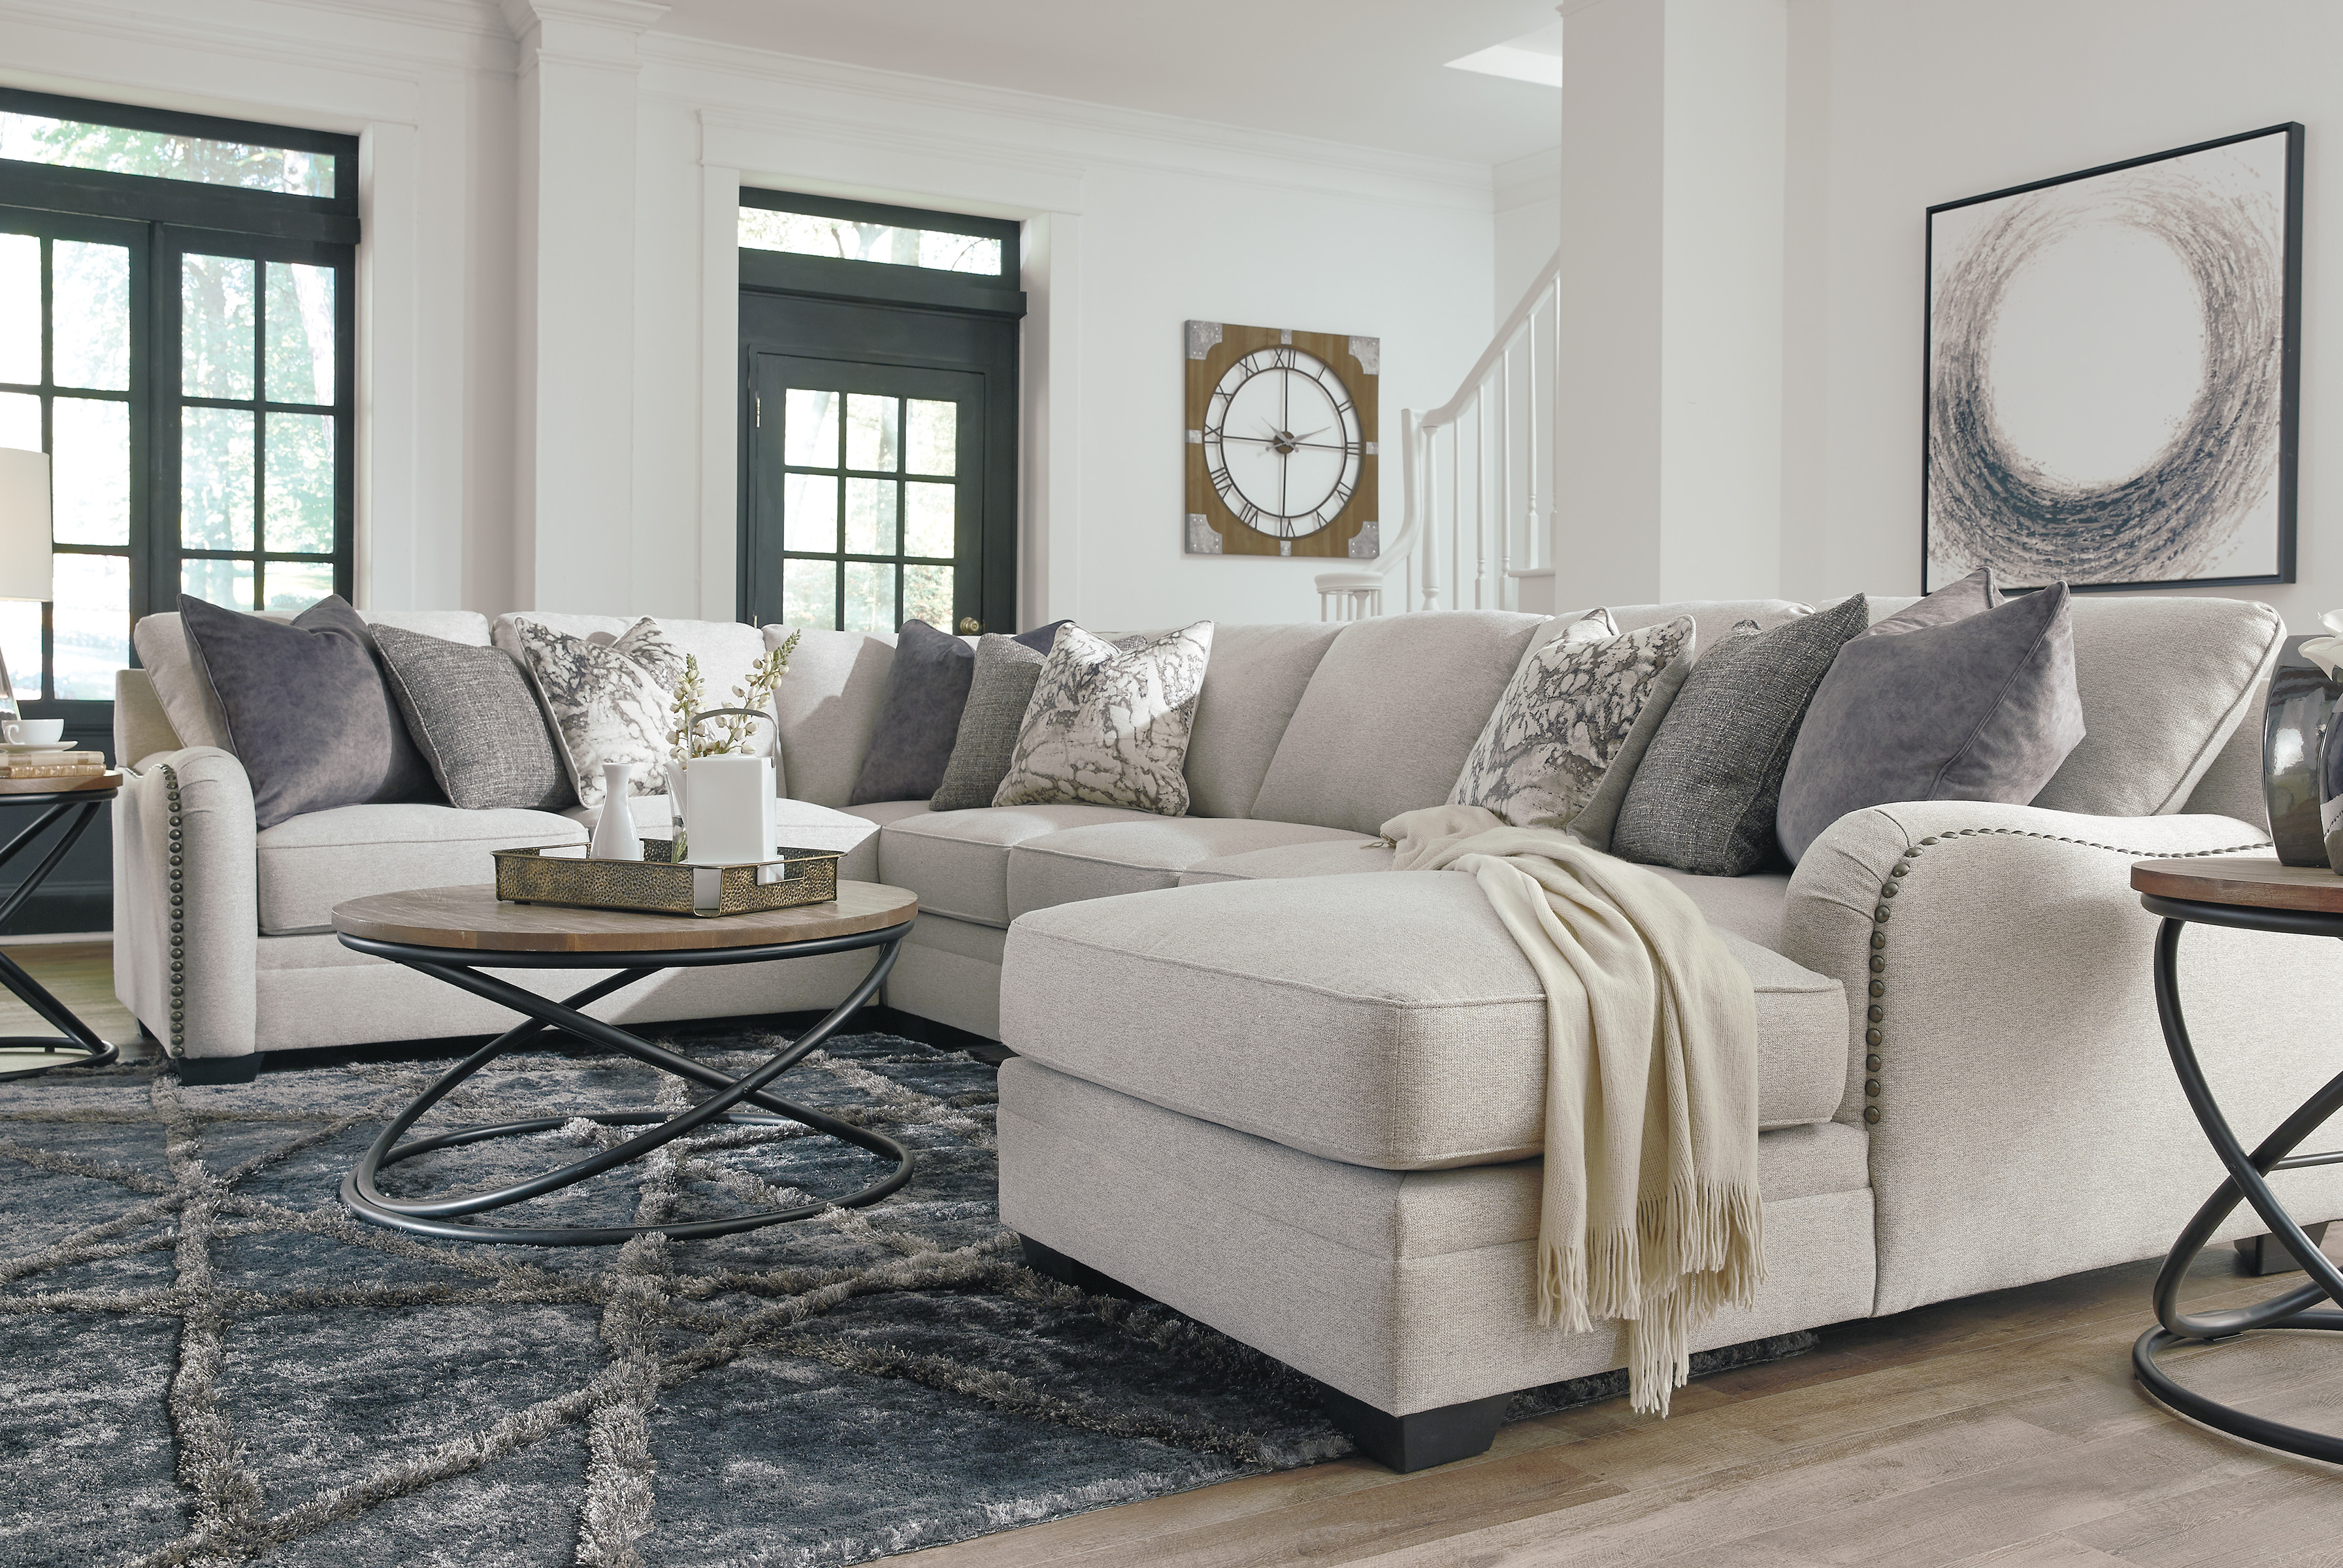 Cozy Ashley sectional